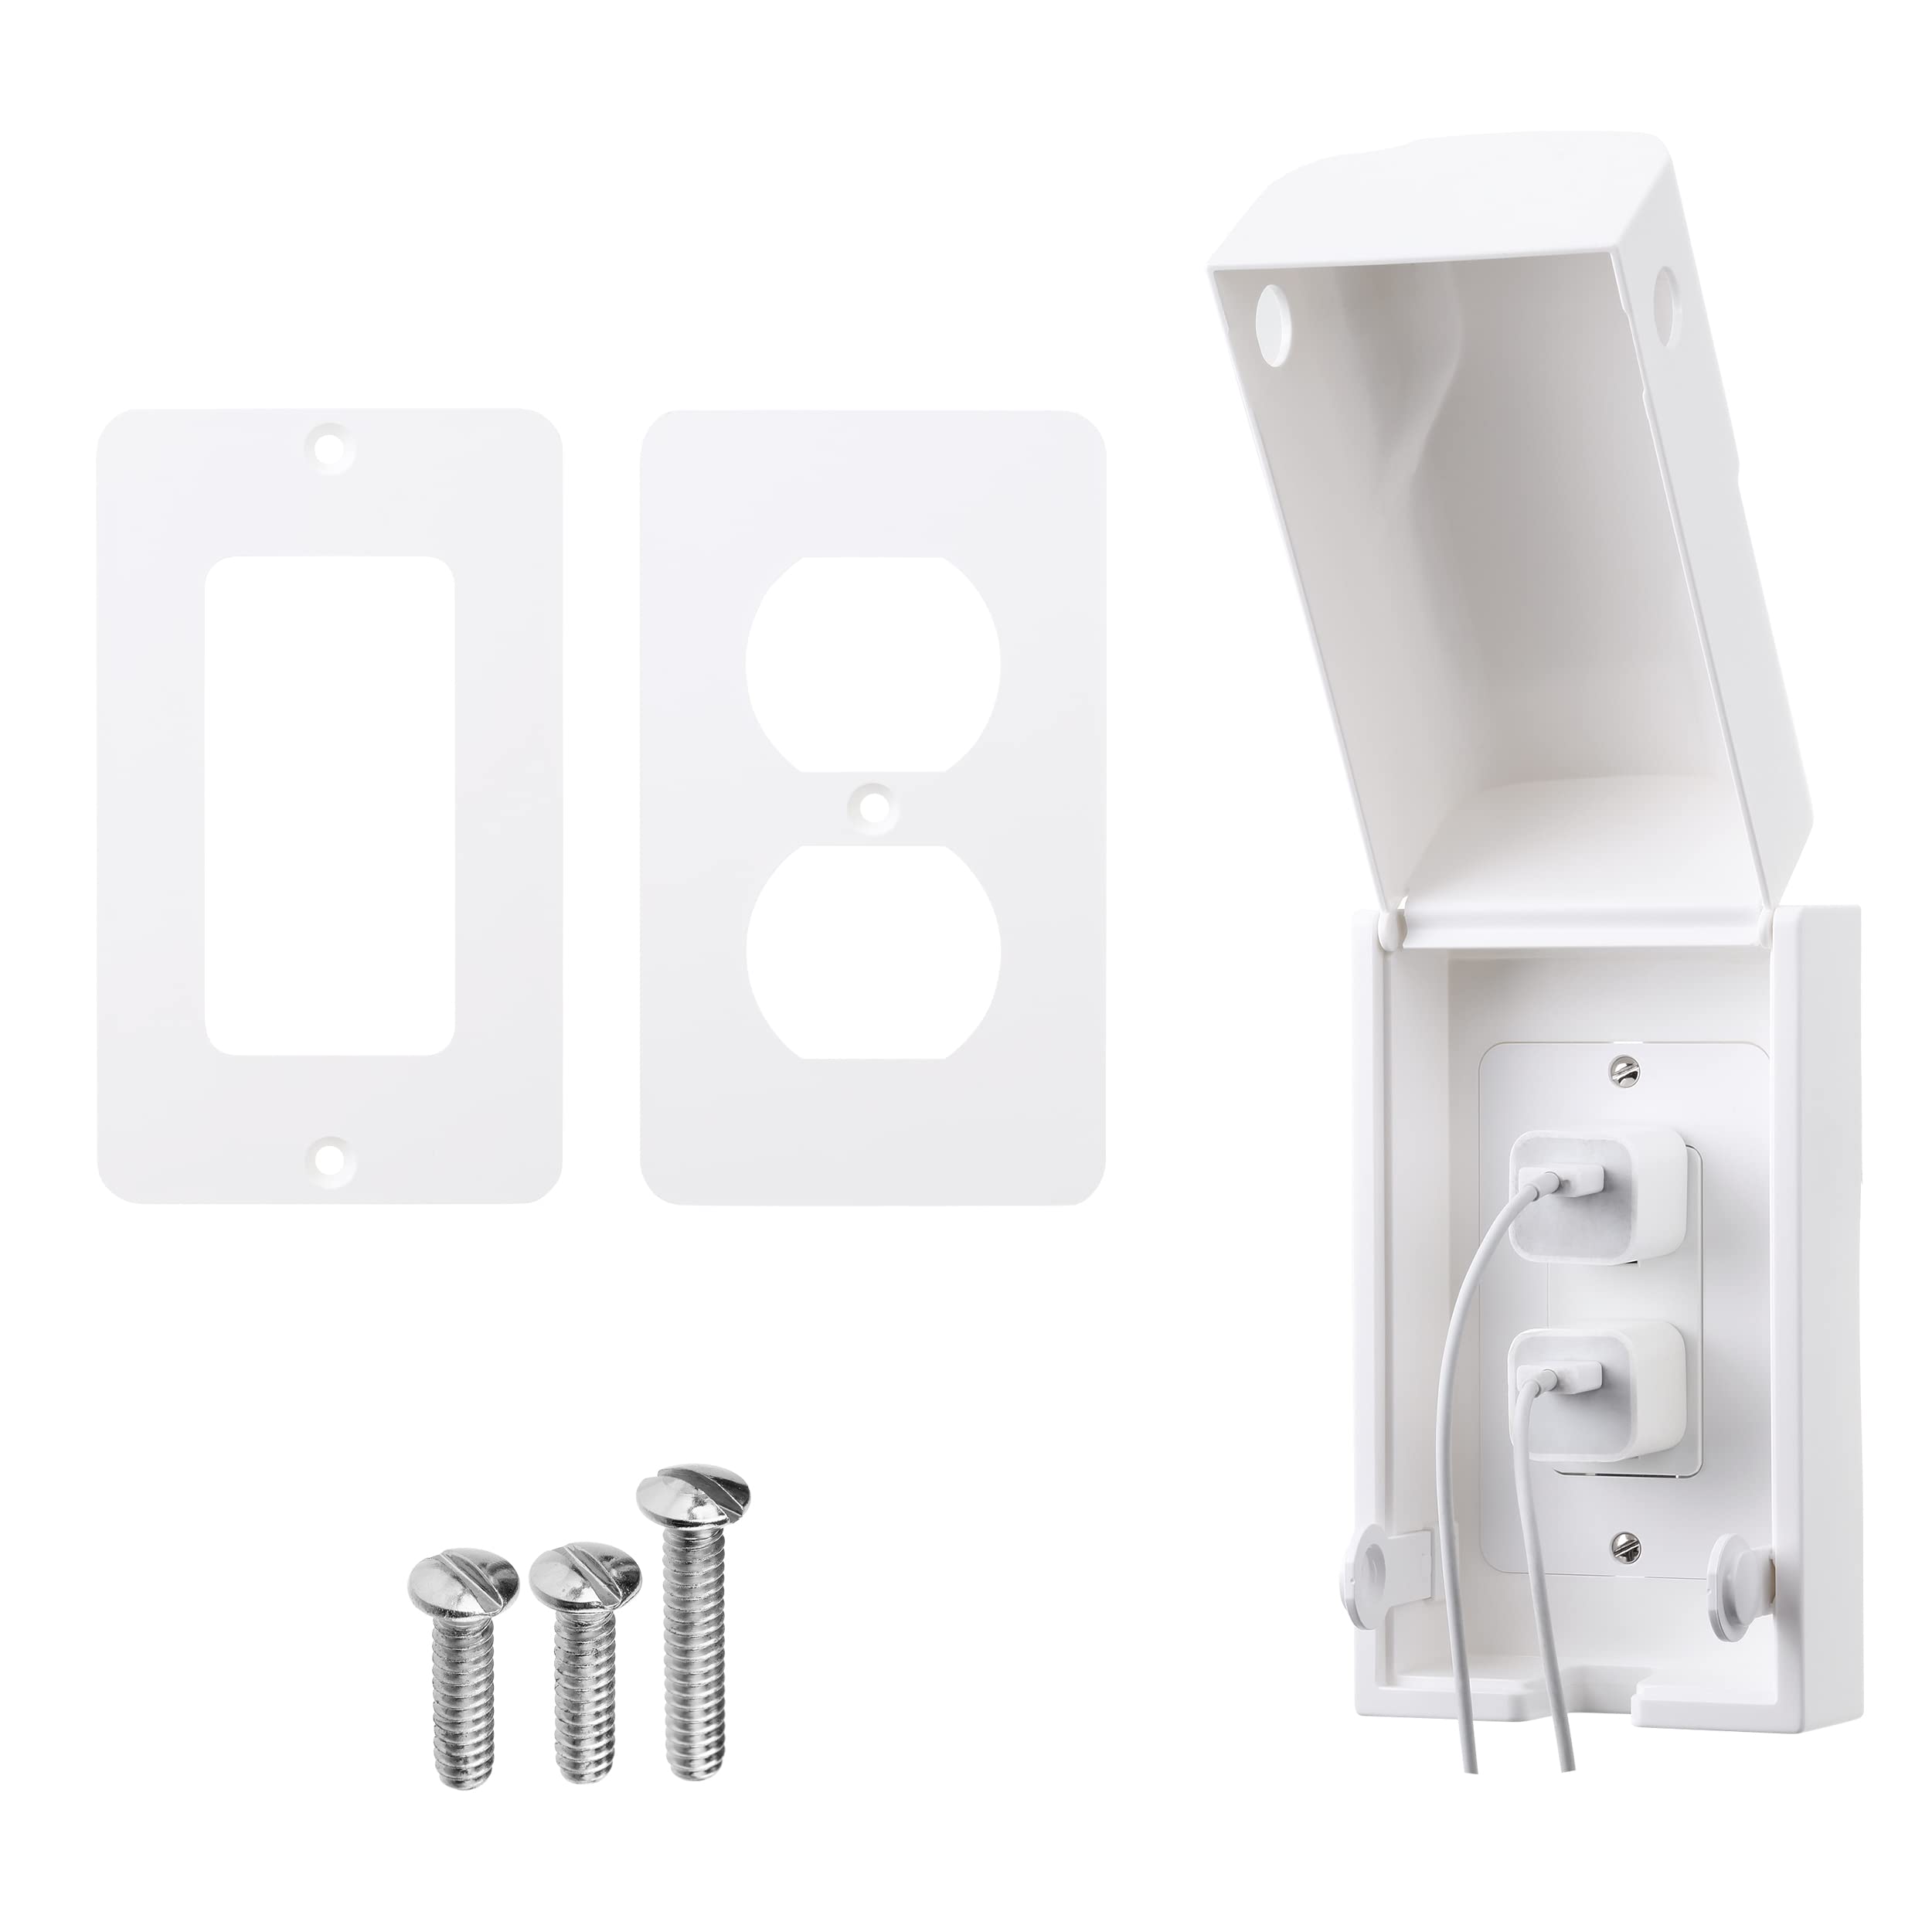 Bates Choice Bates - Baby Safety Outlet cover Box, Outlet covers Baby Proofing, Plug covers for Electrical Outlets, Baby Proof Outlet covers,